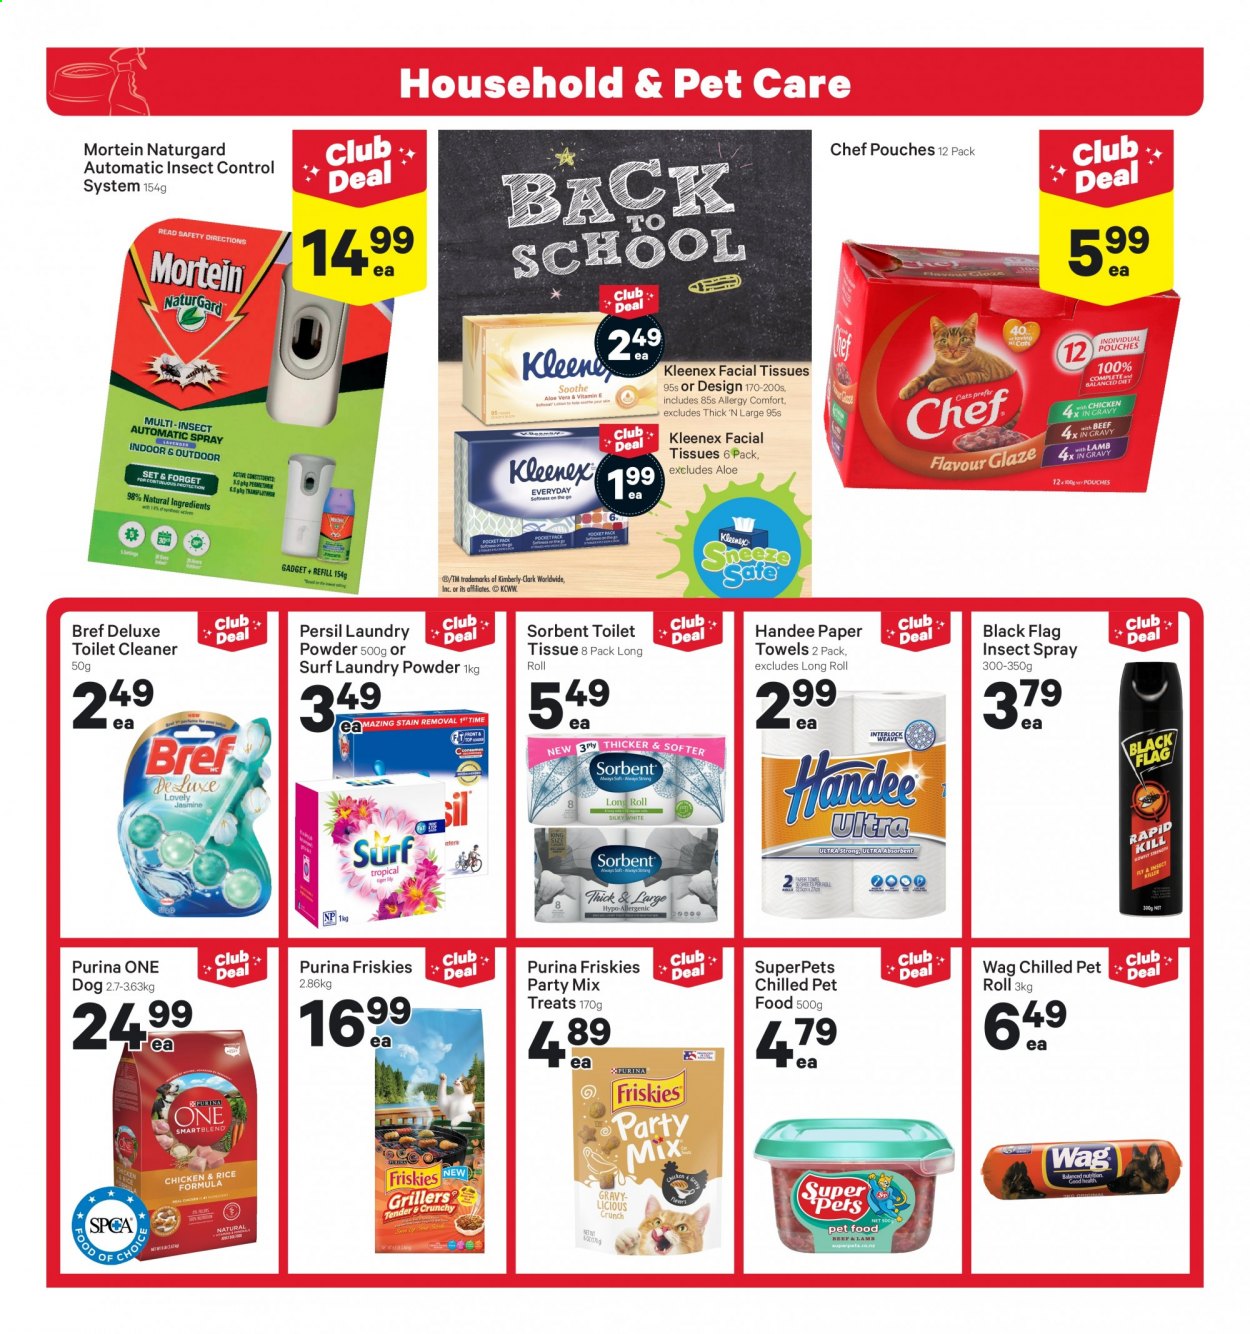 thumbnail - New World mailer - 18.01.2021 - 24.01.2021 - Sales products - rice, lamb meat, Kleenex, toilet paper, tissues, Handee, kitchen towels, paper towels, facial tissues, body lotion, insect killer, cleaner, laundry powder, toilet cleaner, Mortein. Page 15.